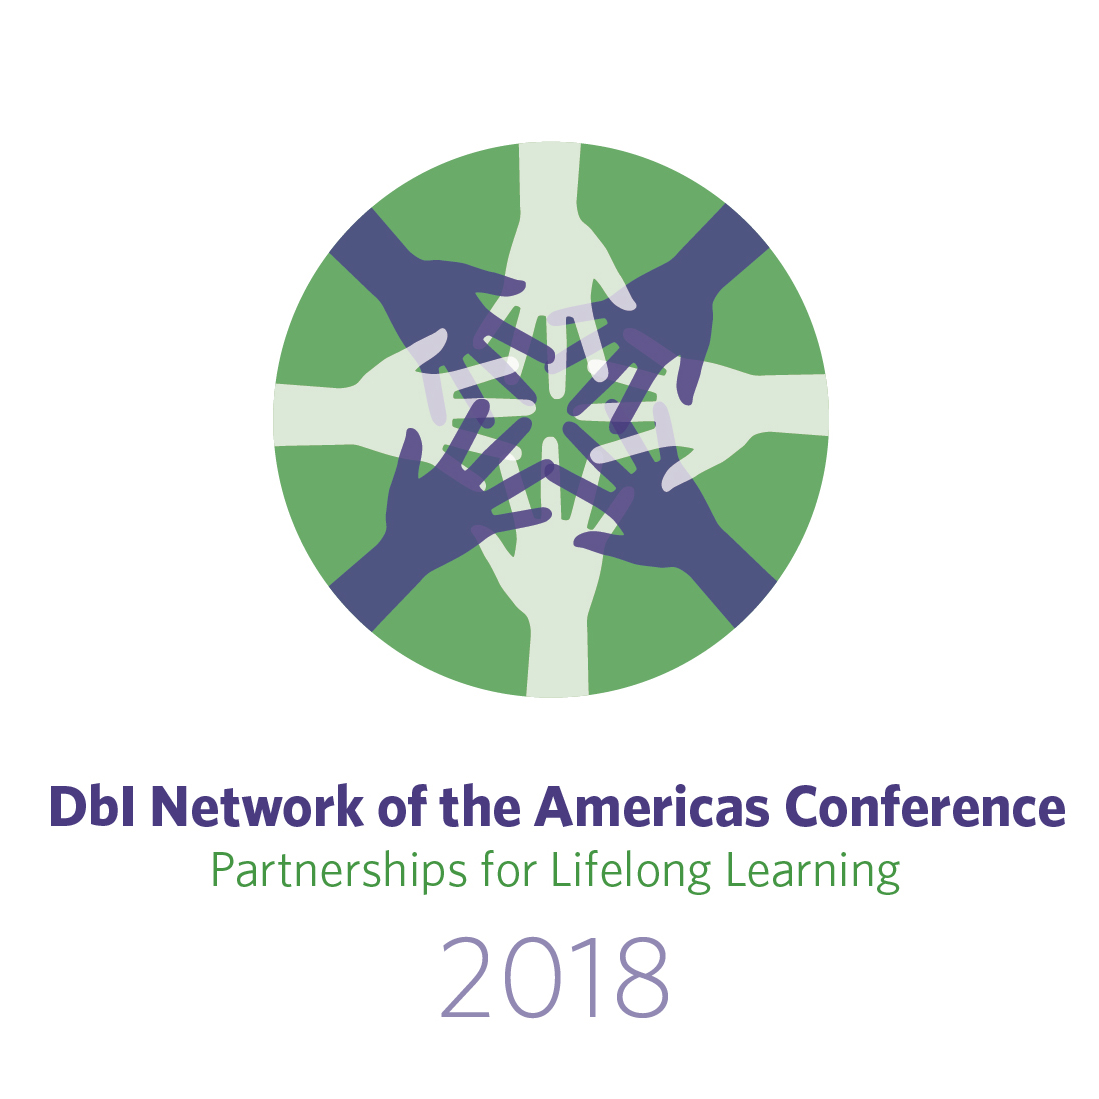 DbI Network of the Americas Conference. Partnerships for lifelong learning 2018